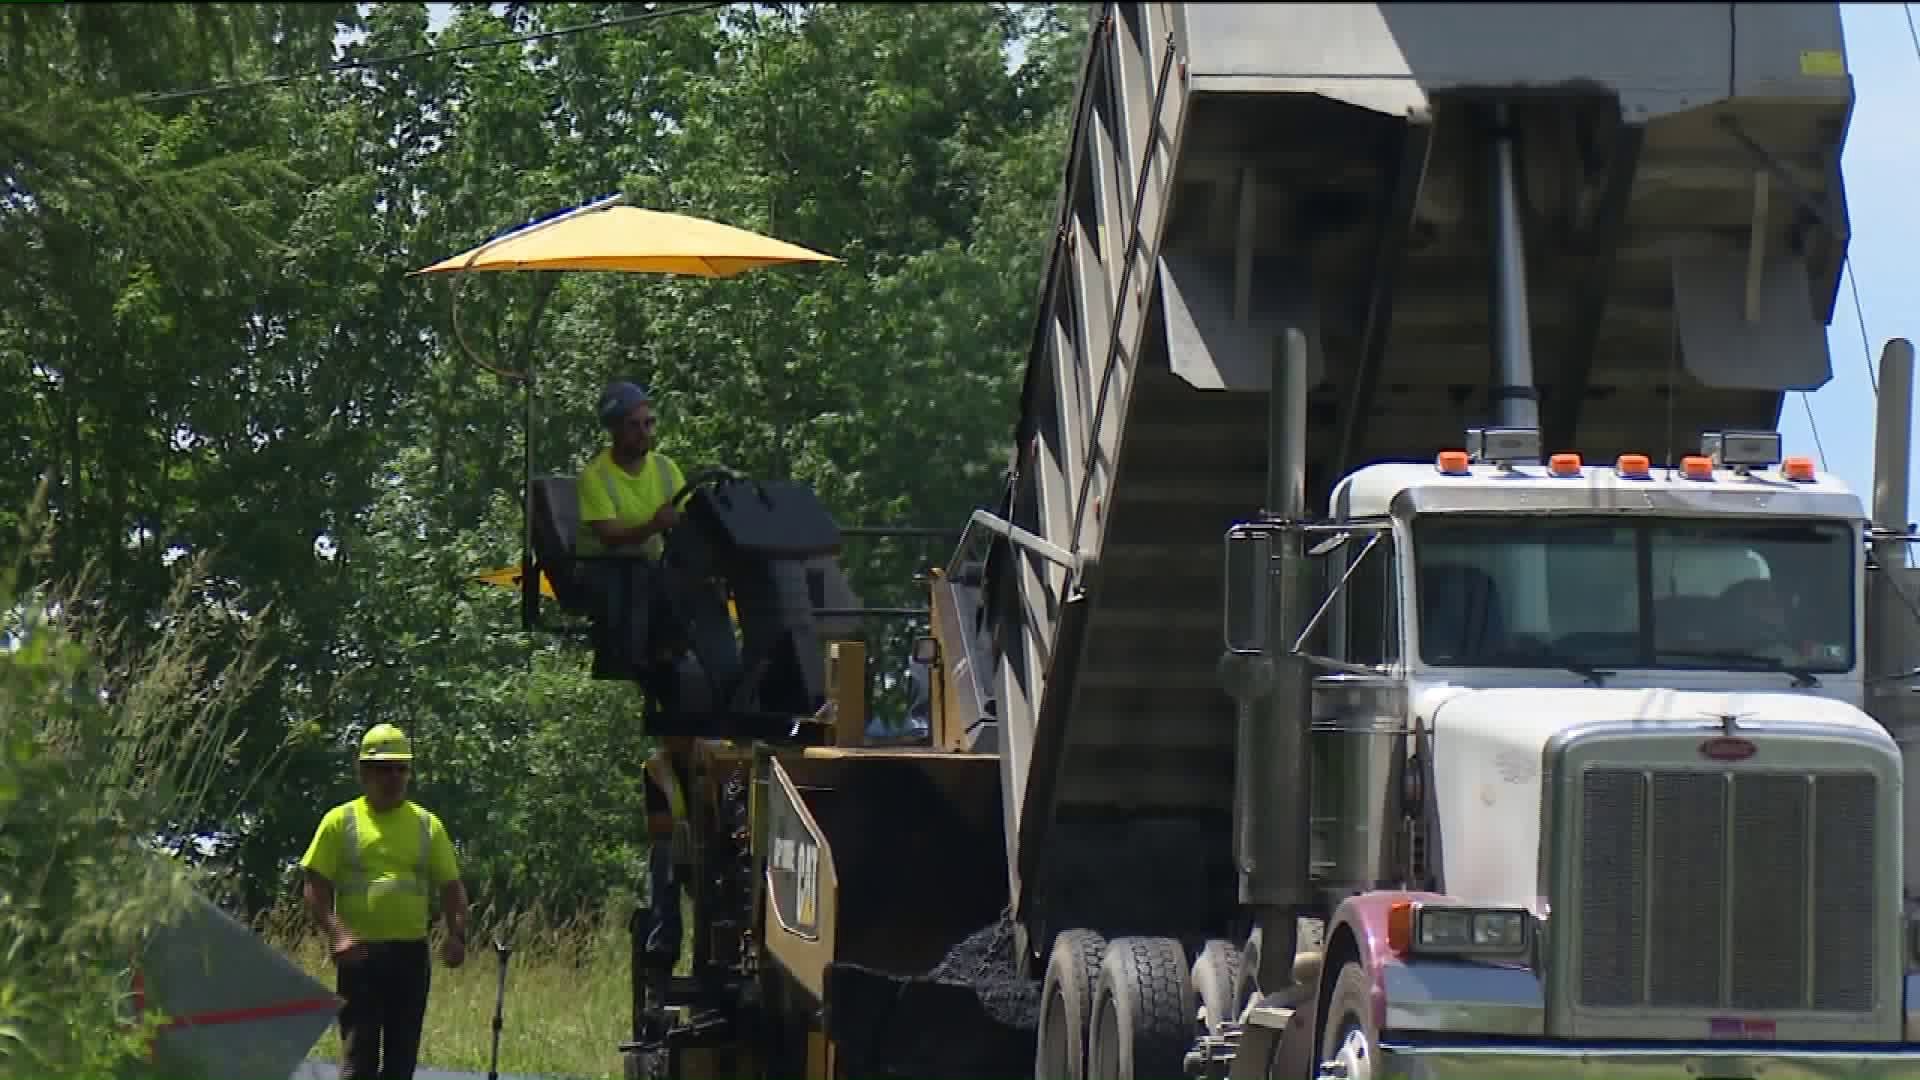 Paving the Way in Susquehanna County